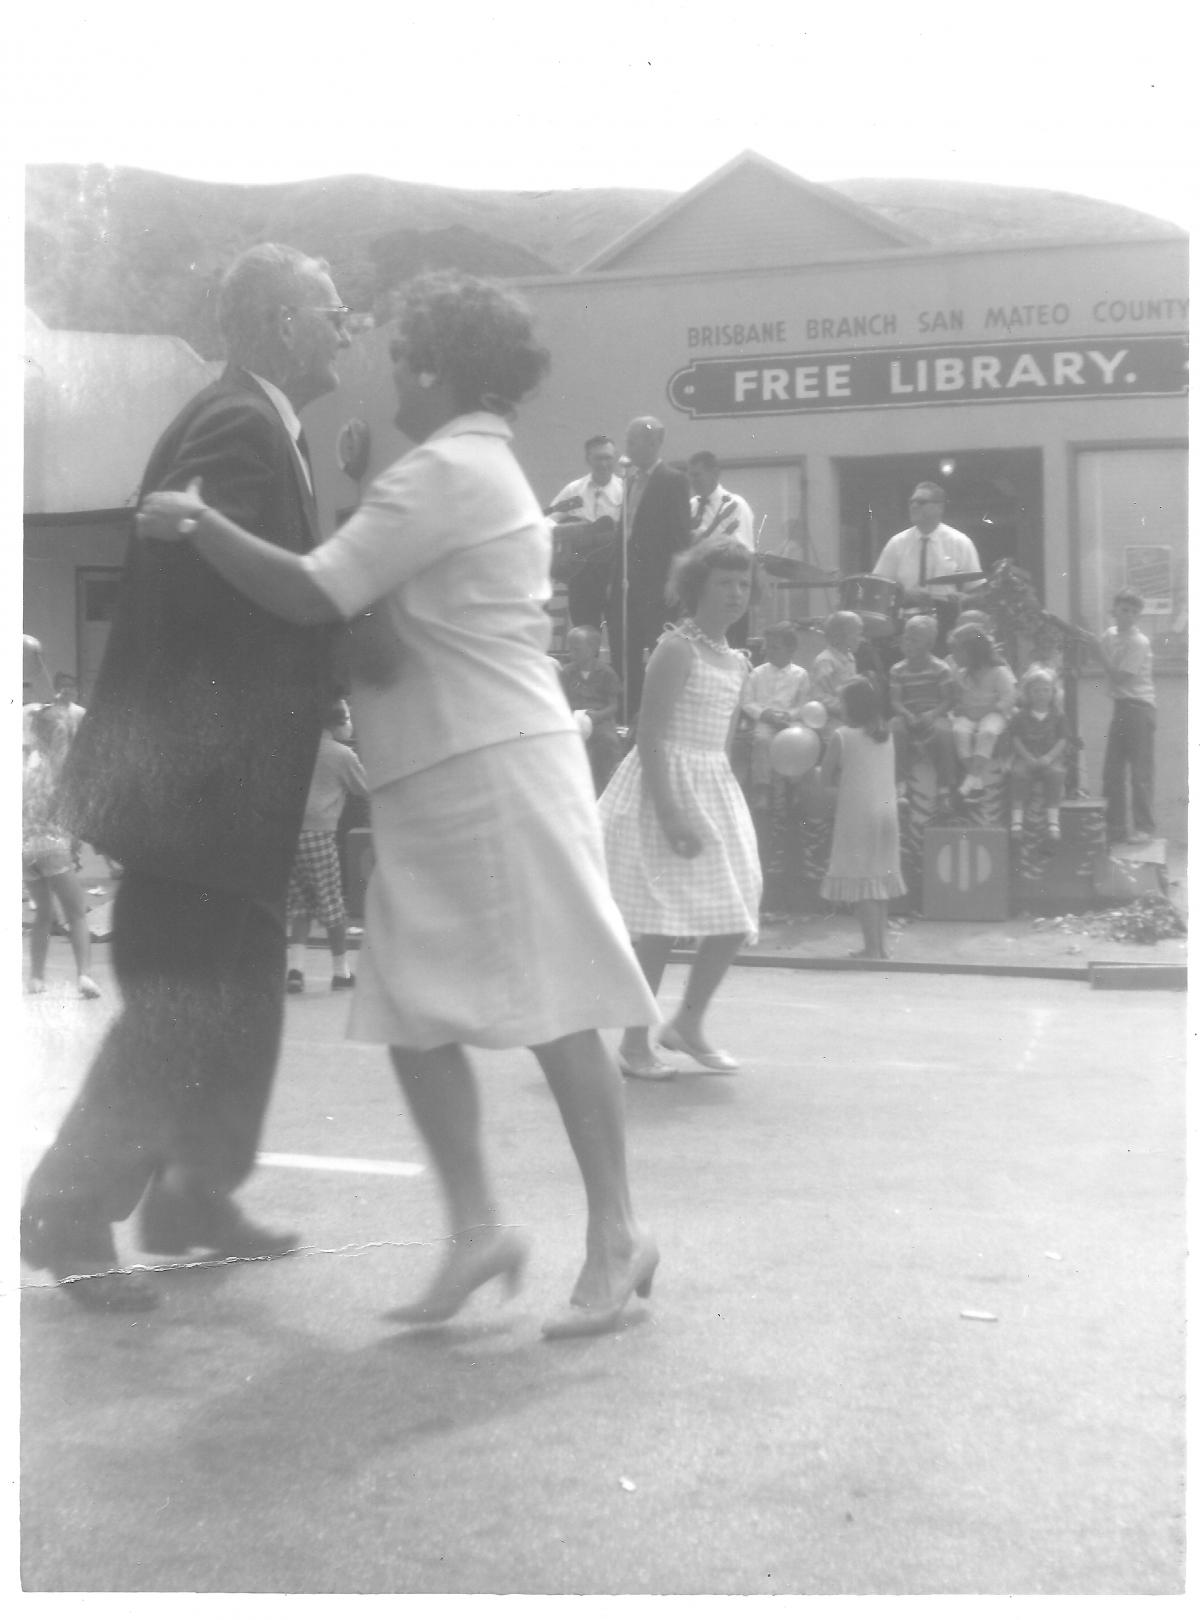 Western Days celebration in front of the Brisbane Library, 1963